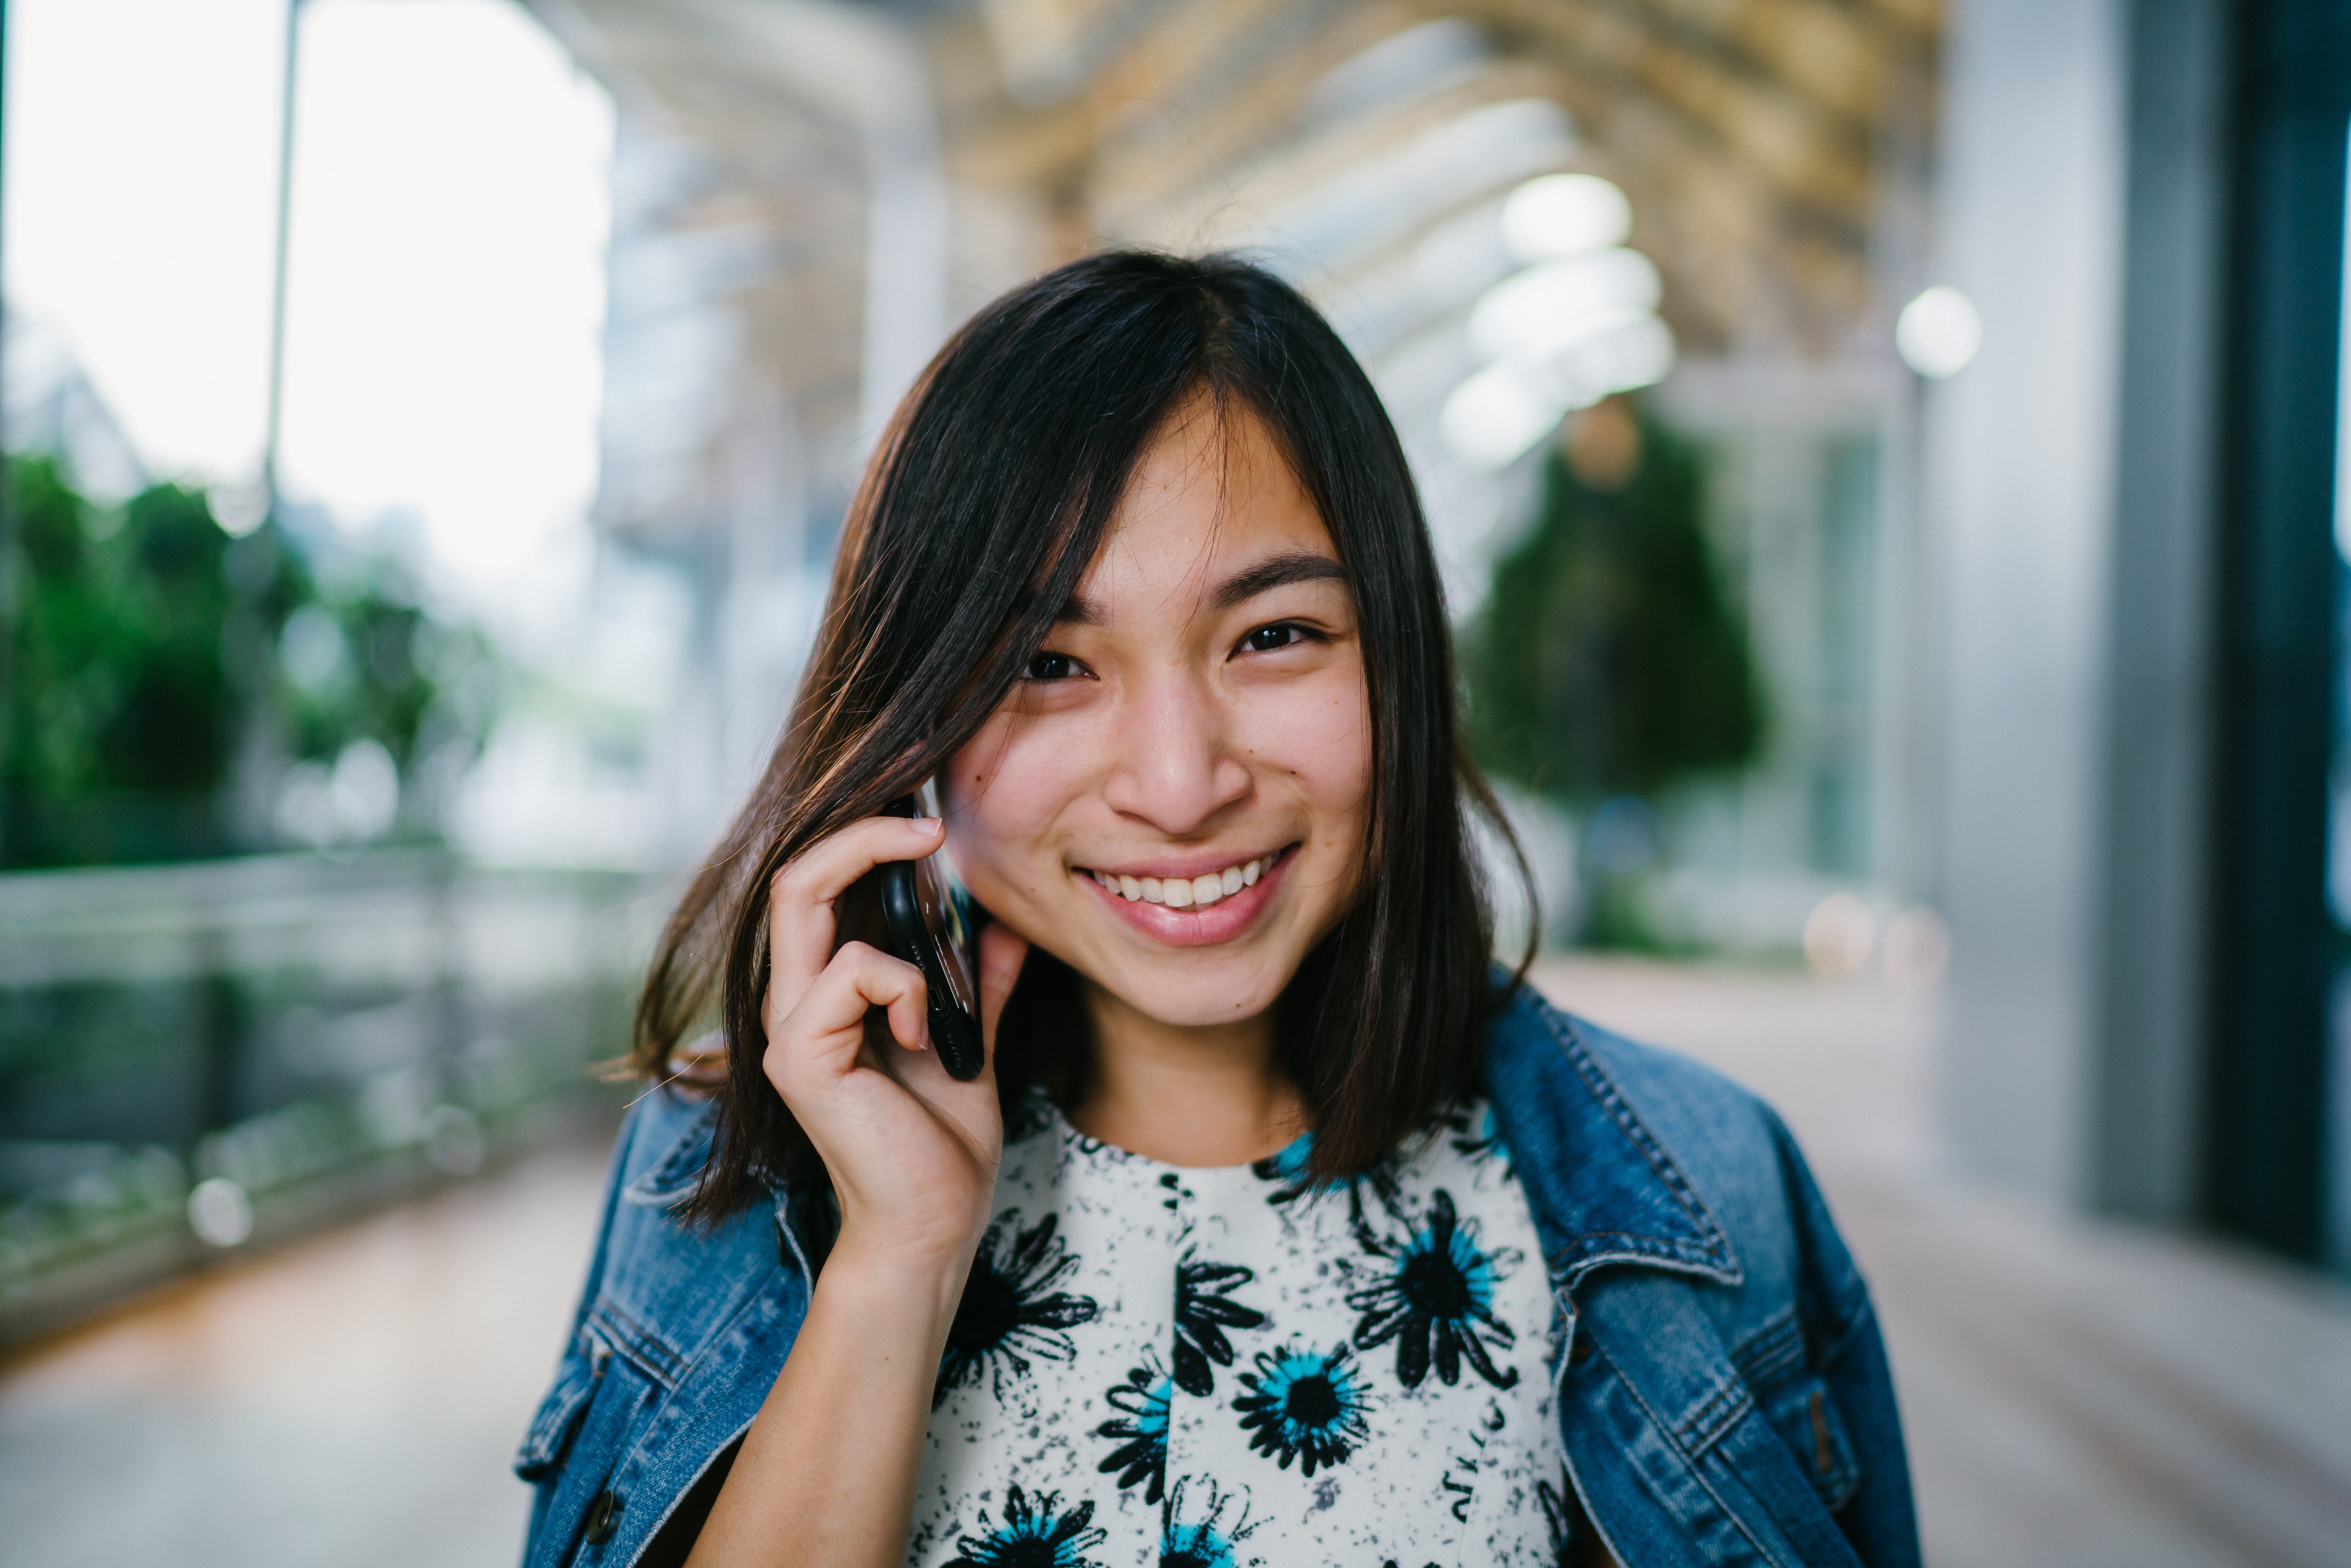 A young womman smiles while she is talking on the phone and walking on a campus.